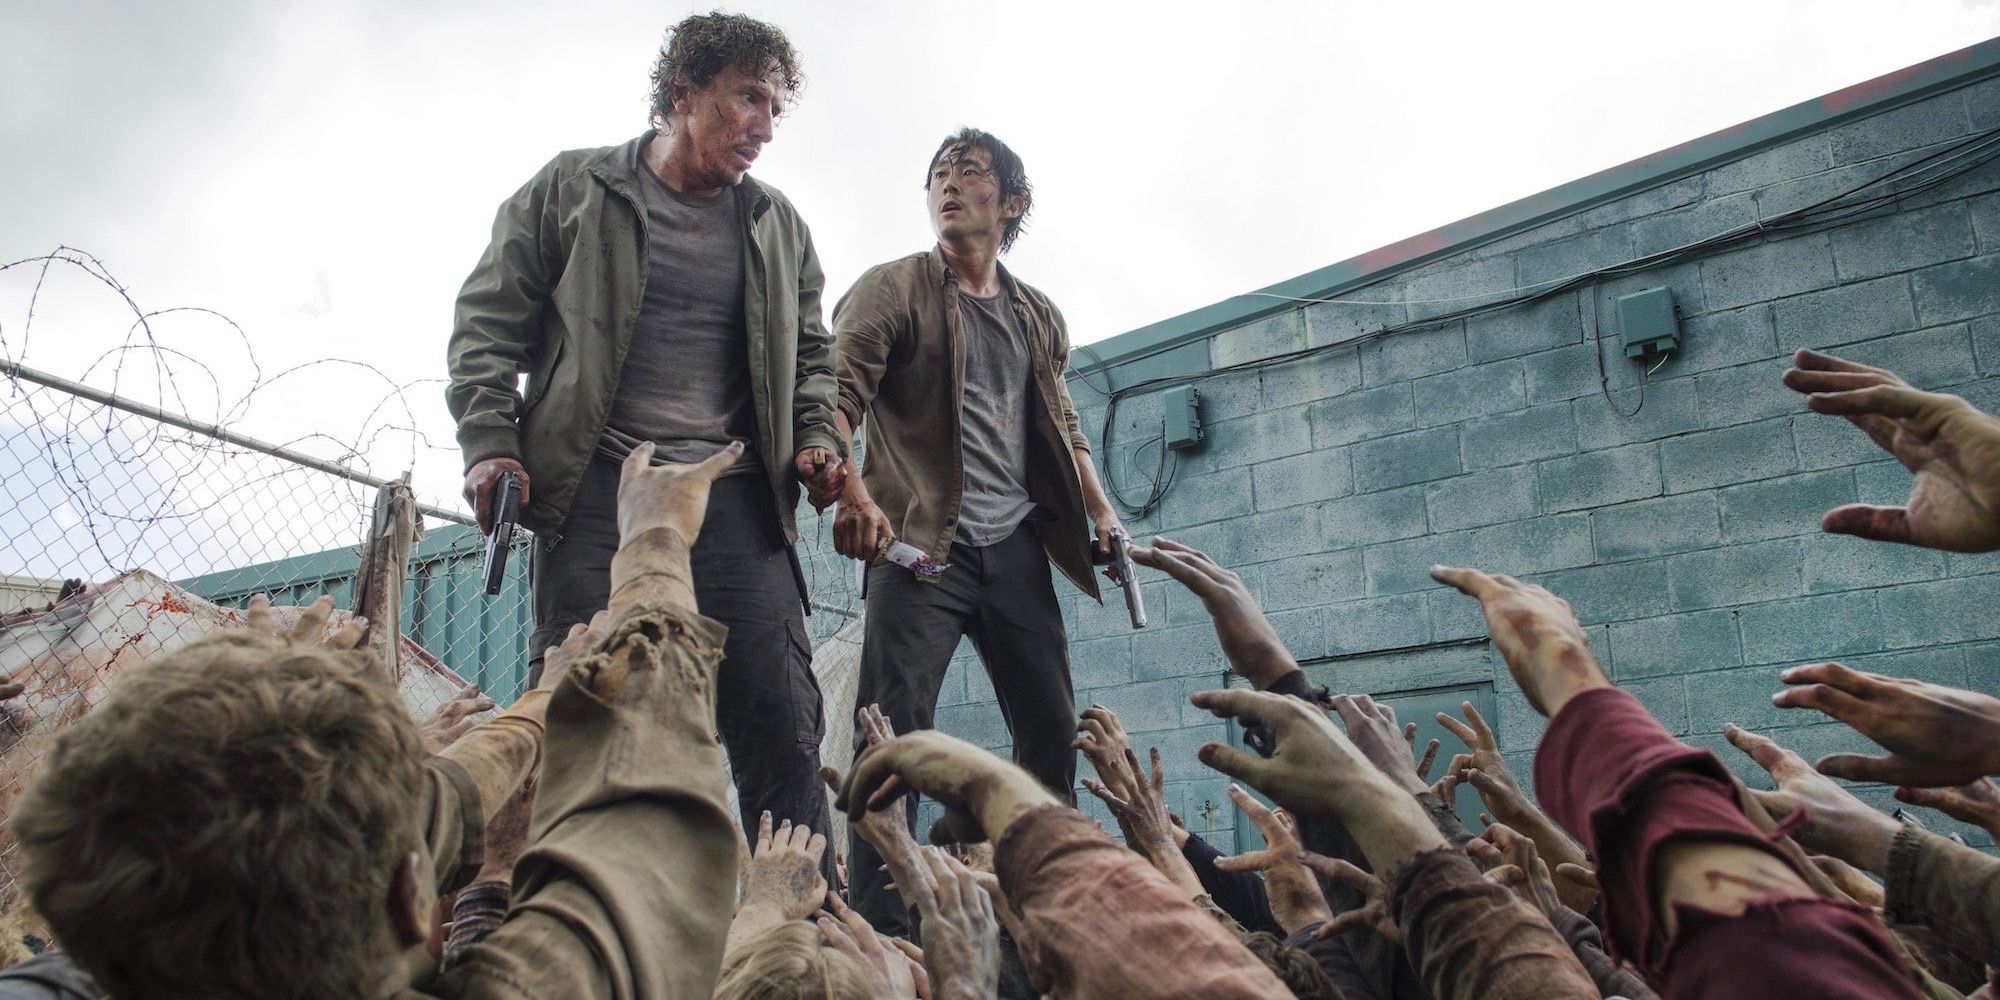 Michael Traynor and Steven Yeun as Nicholas and Glenn in The Walking Dead